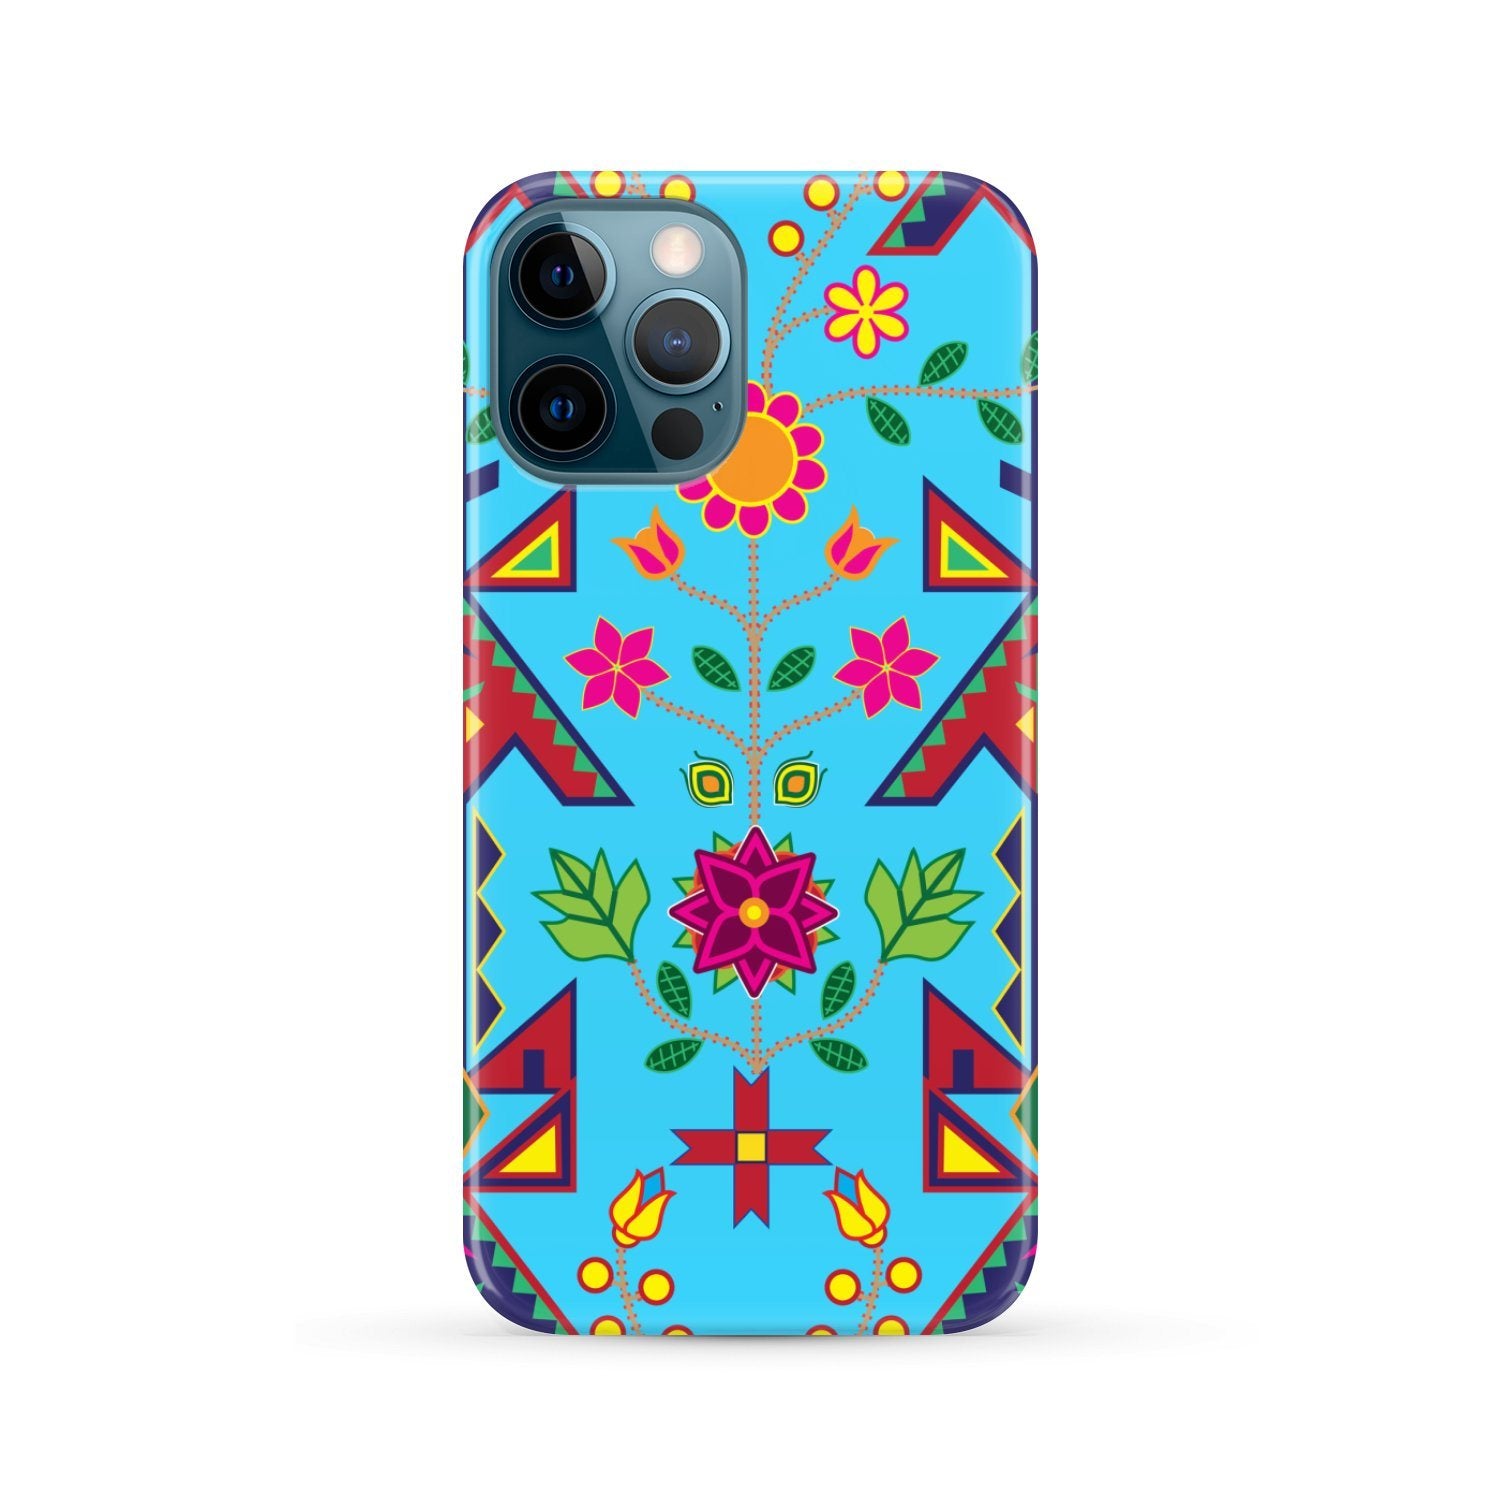 Geometric Floral Spring - Sky Blue Phone Case Phone Case wc-fulfillment iPhone 12 Pro Max 